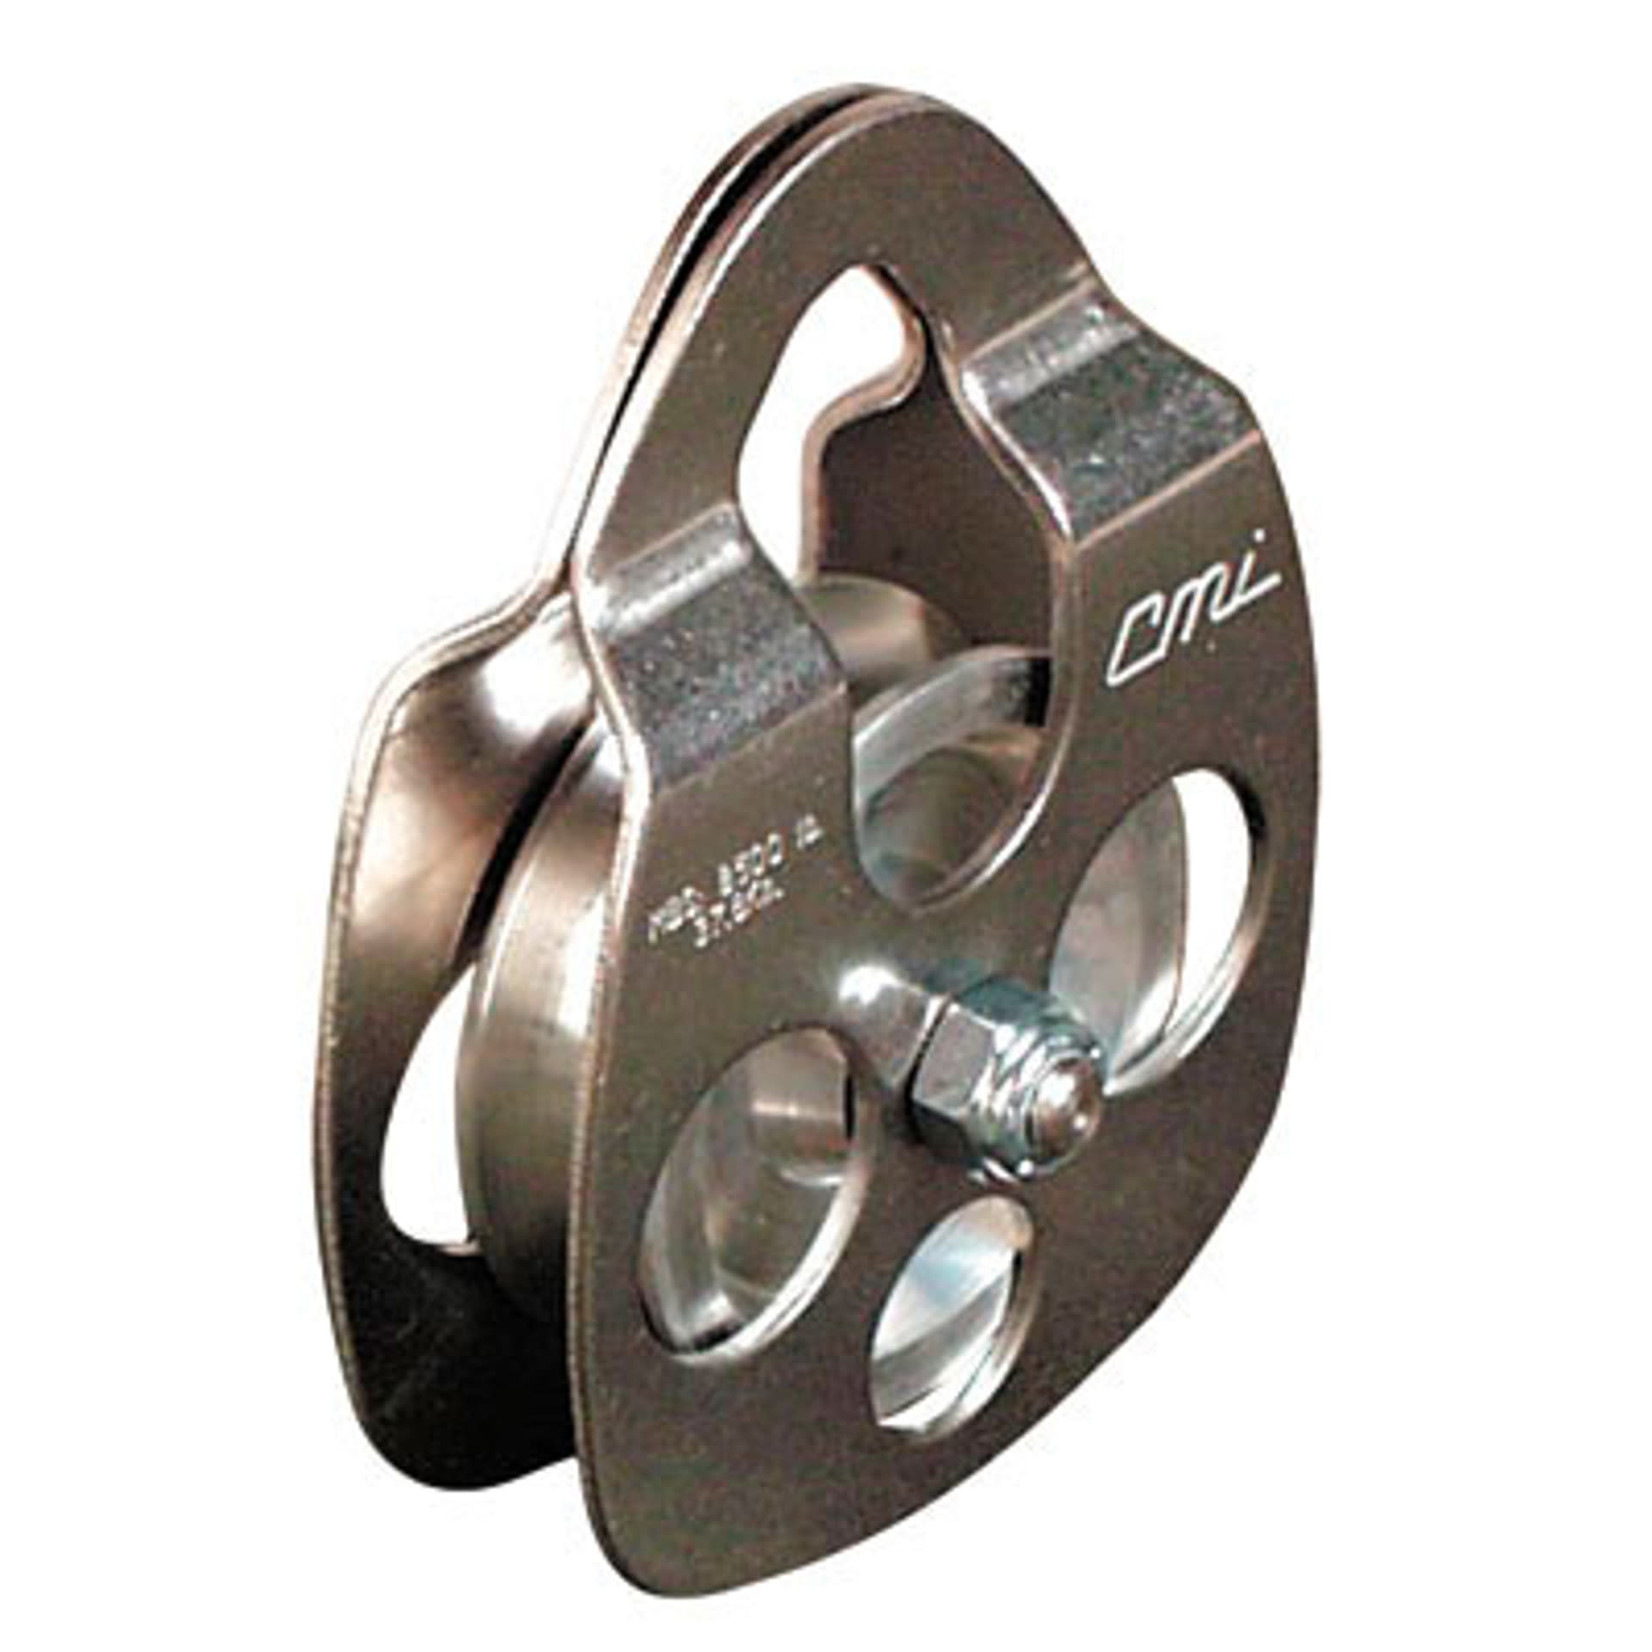 CMI Pulley 5/8 SS, 2 3/8" Sheave, Needle Bearing, SS Axle 8500Lbs Mbs